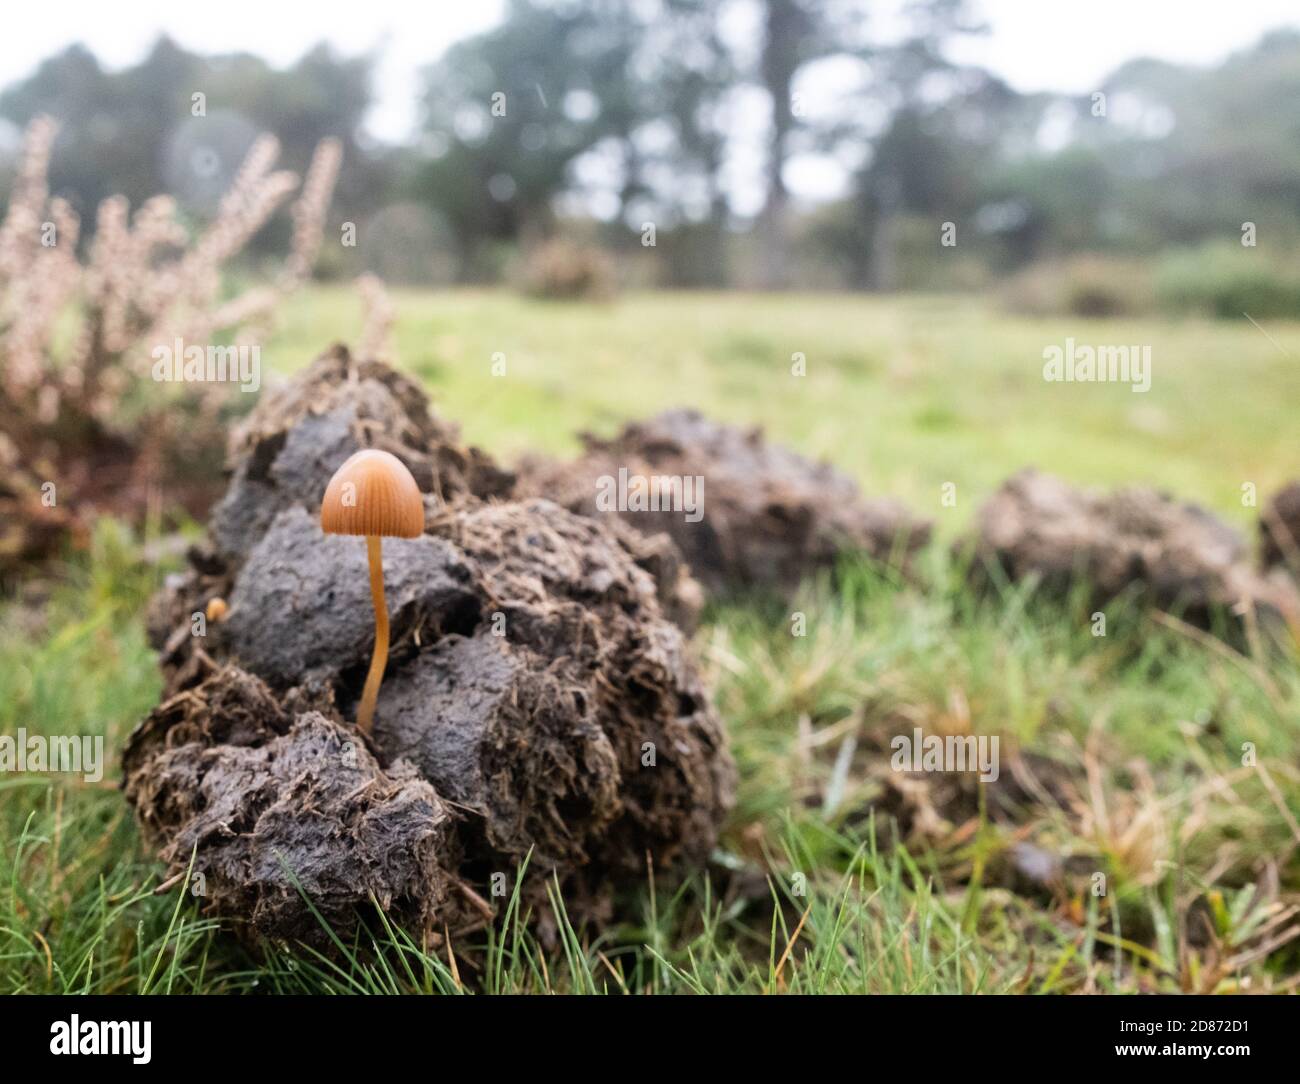 Mushroom fungi sprouting from manure dung in a field on the New Forest during the season of autumn, England, UK. Stock Photo